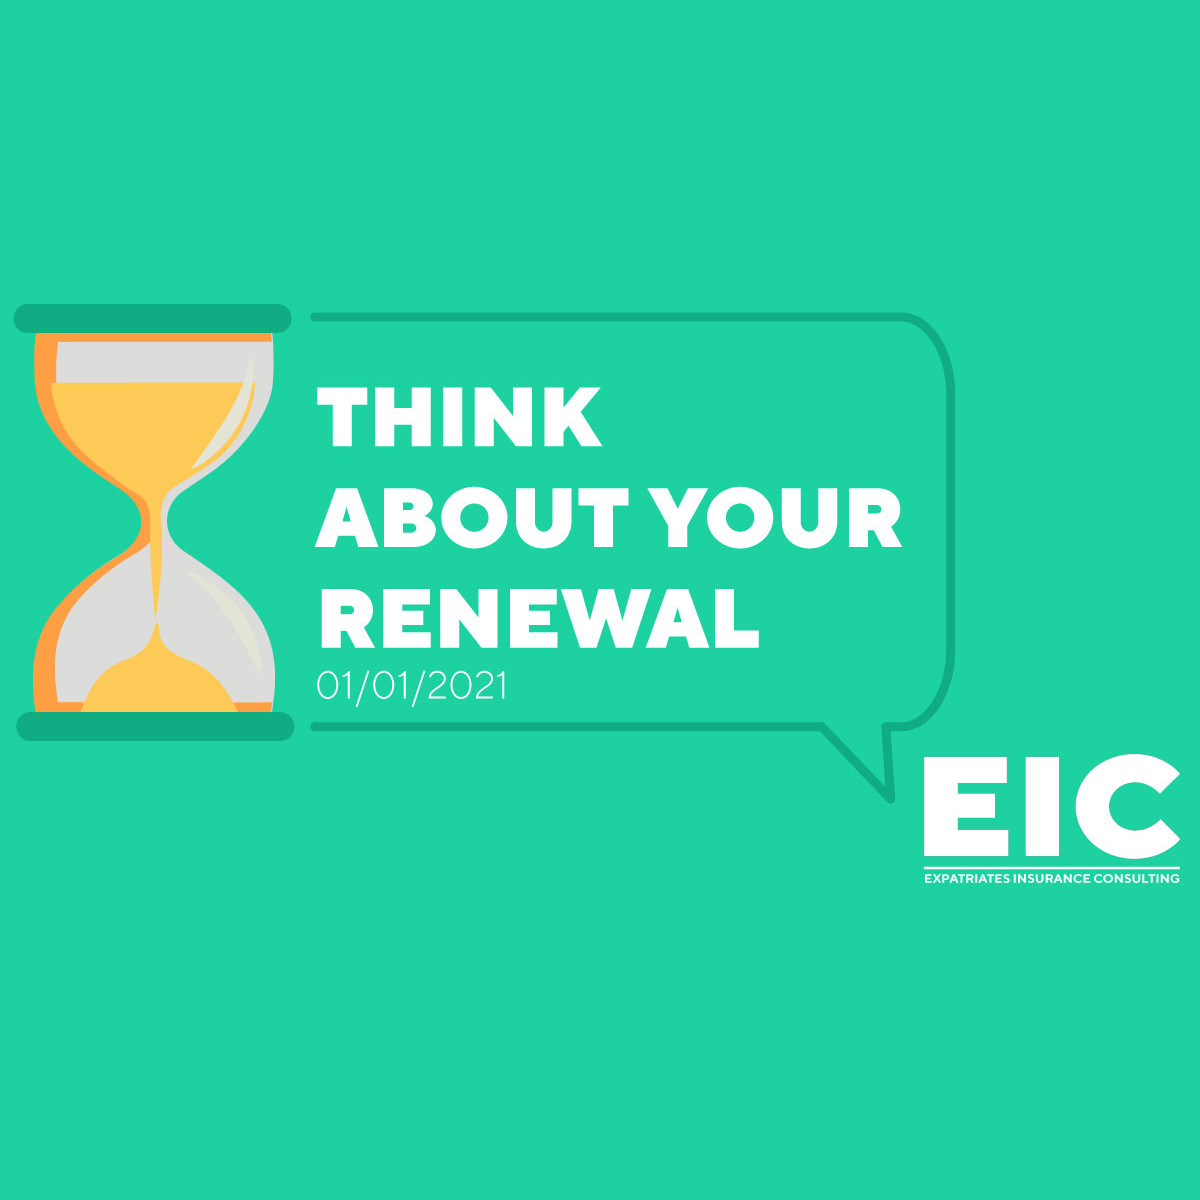 Think about your renewal